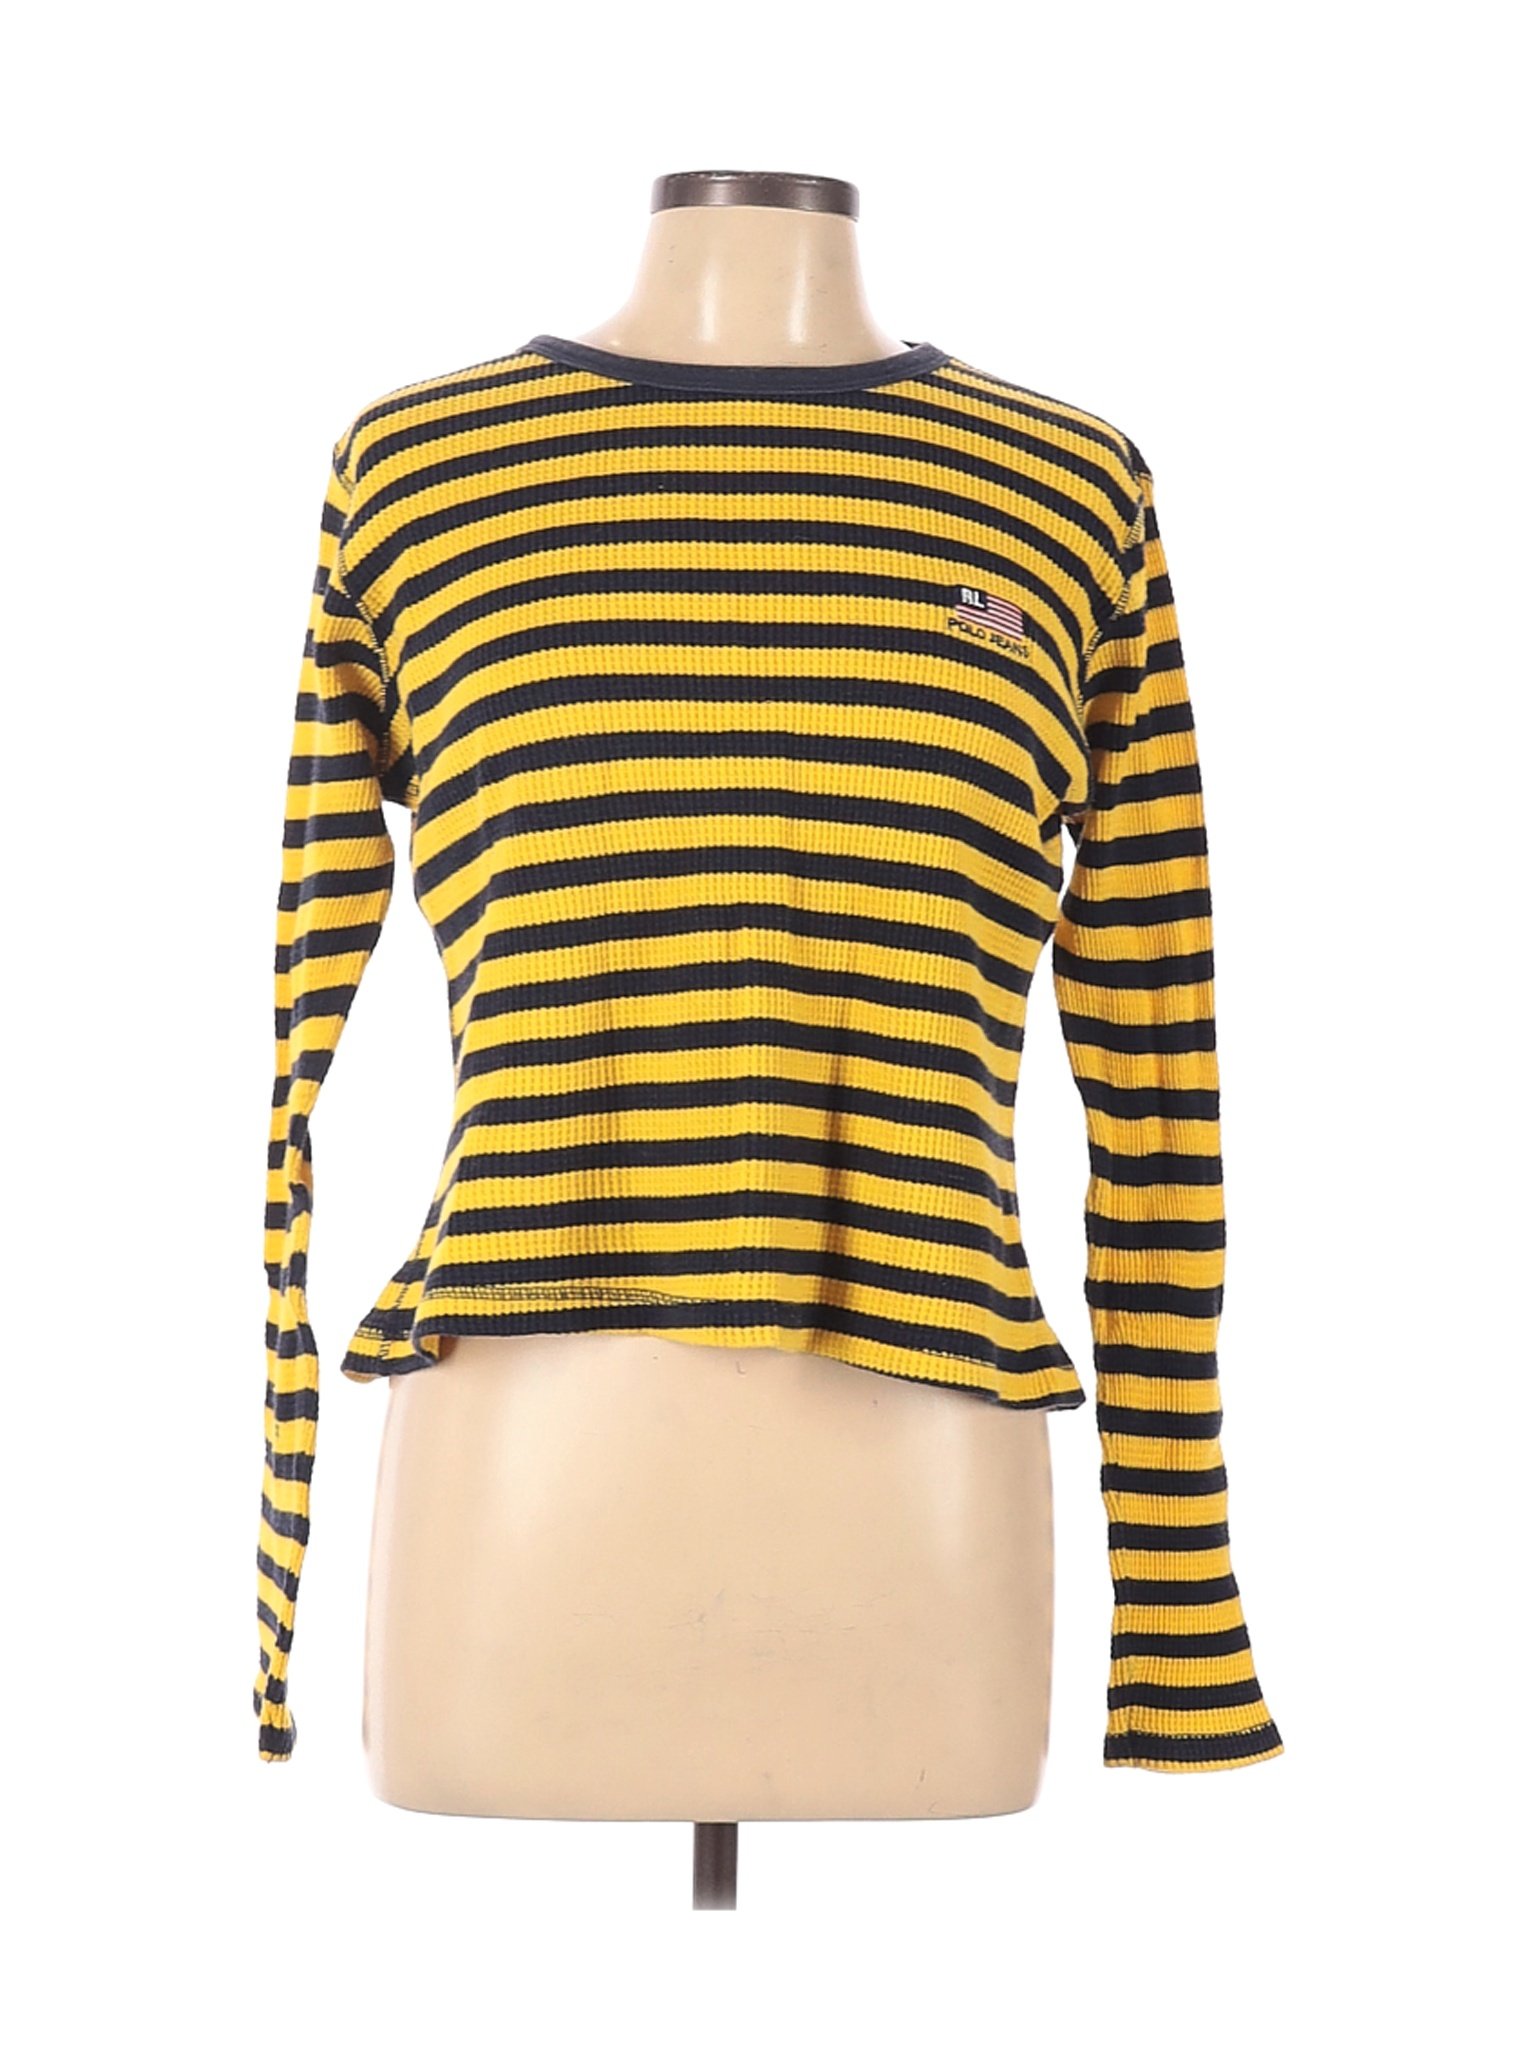 Polo Jeans Co. by Ralph Lauren Women Yellow Pullover Sweater M | eBay